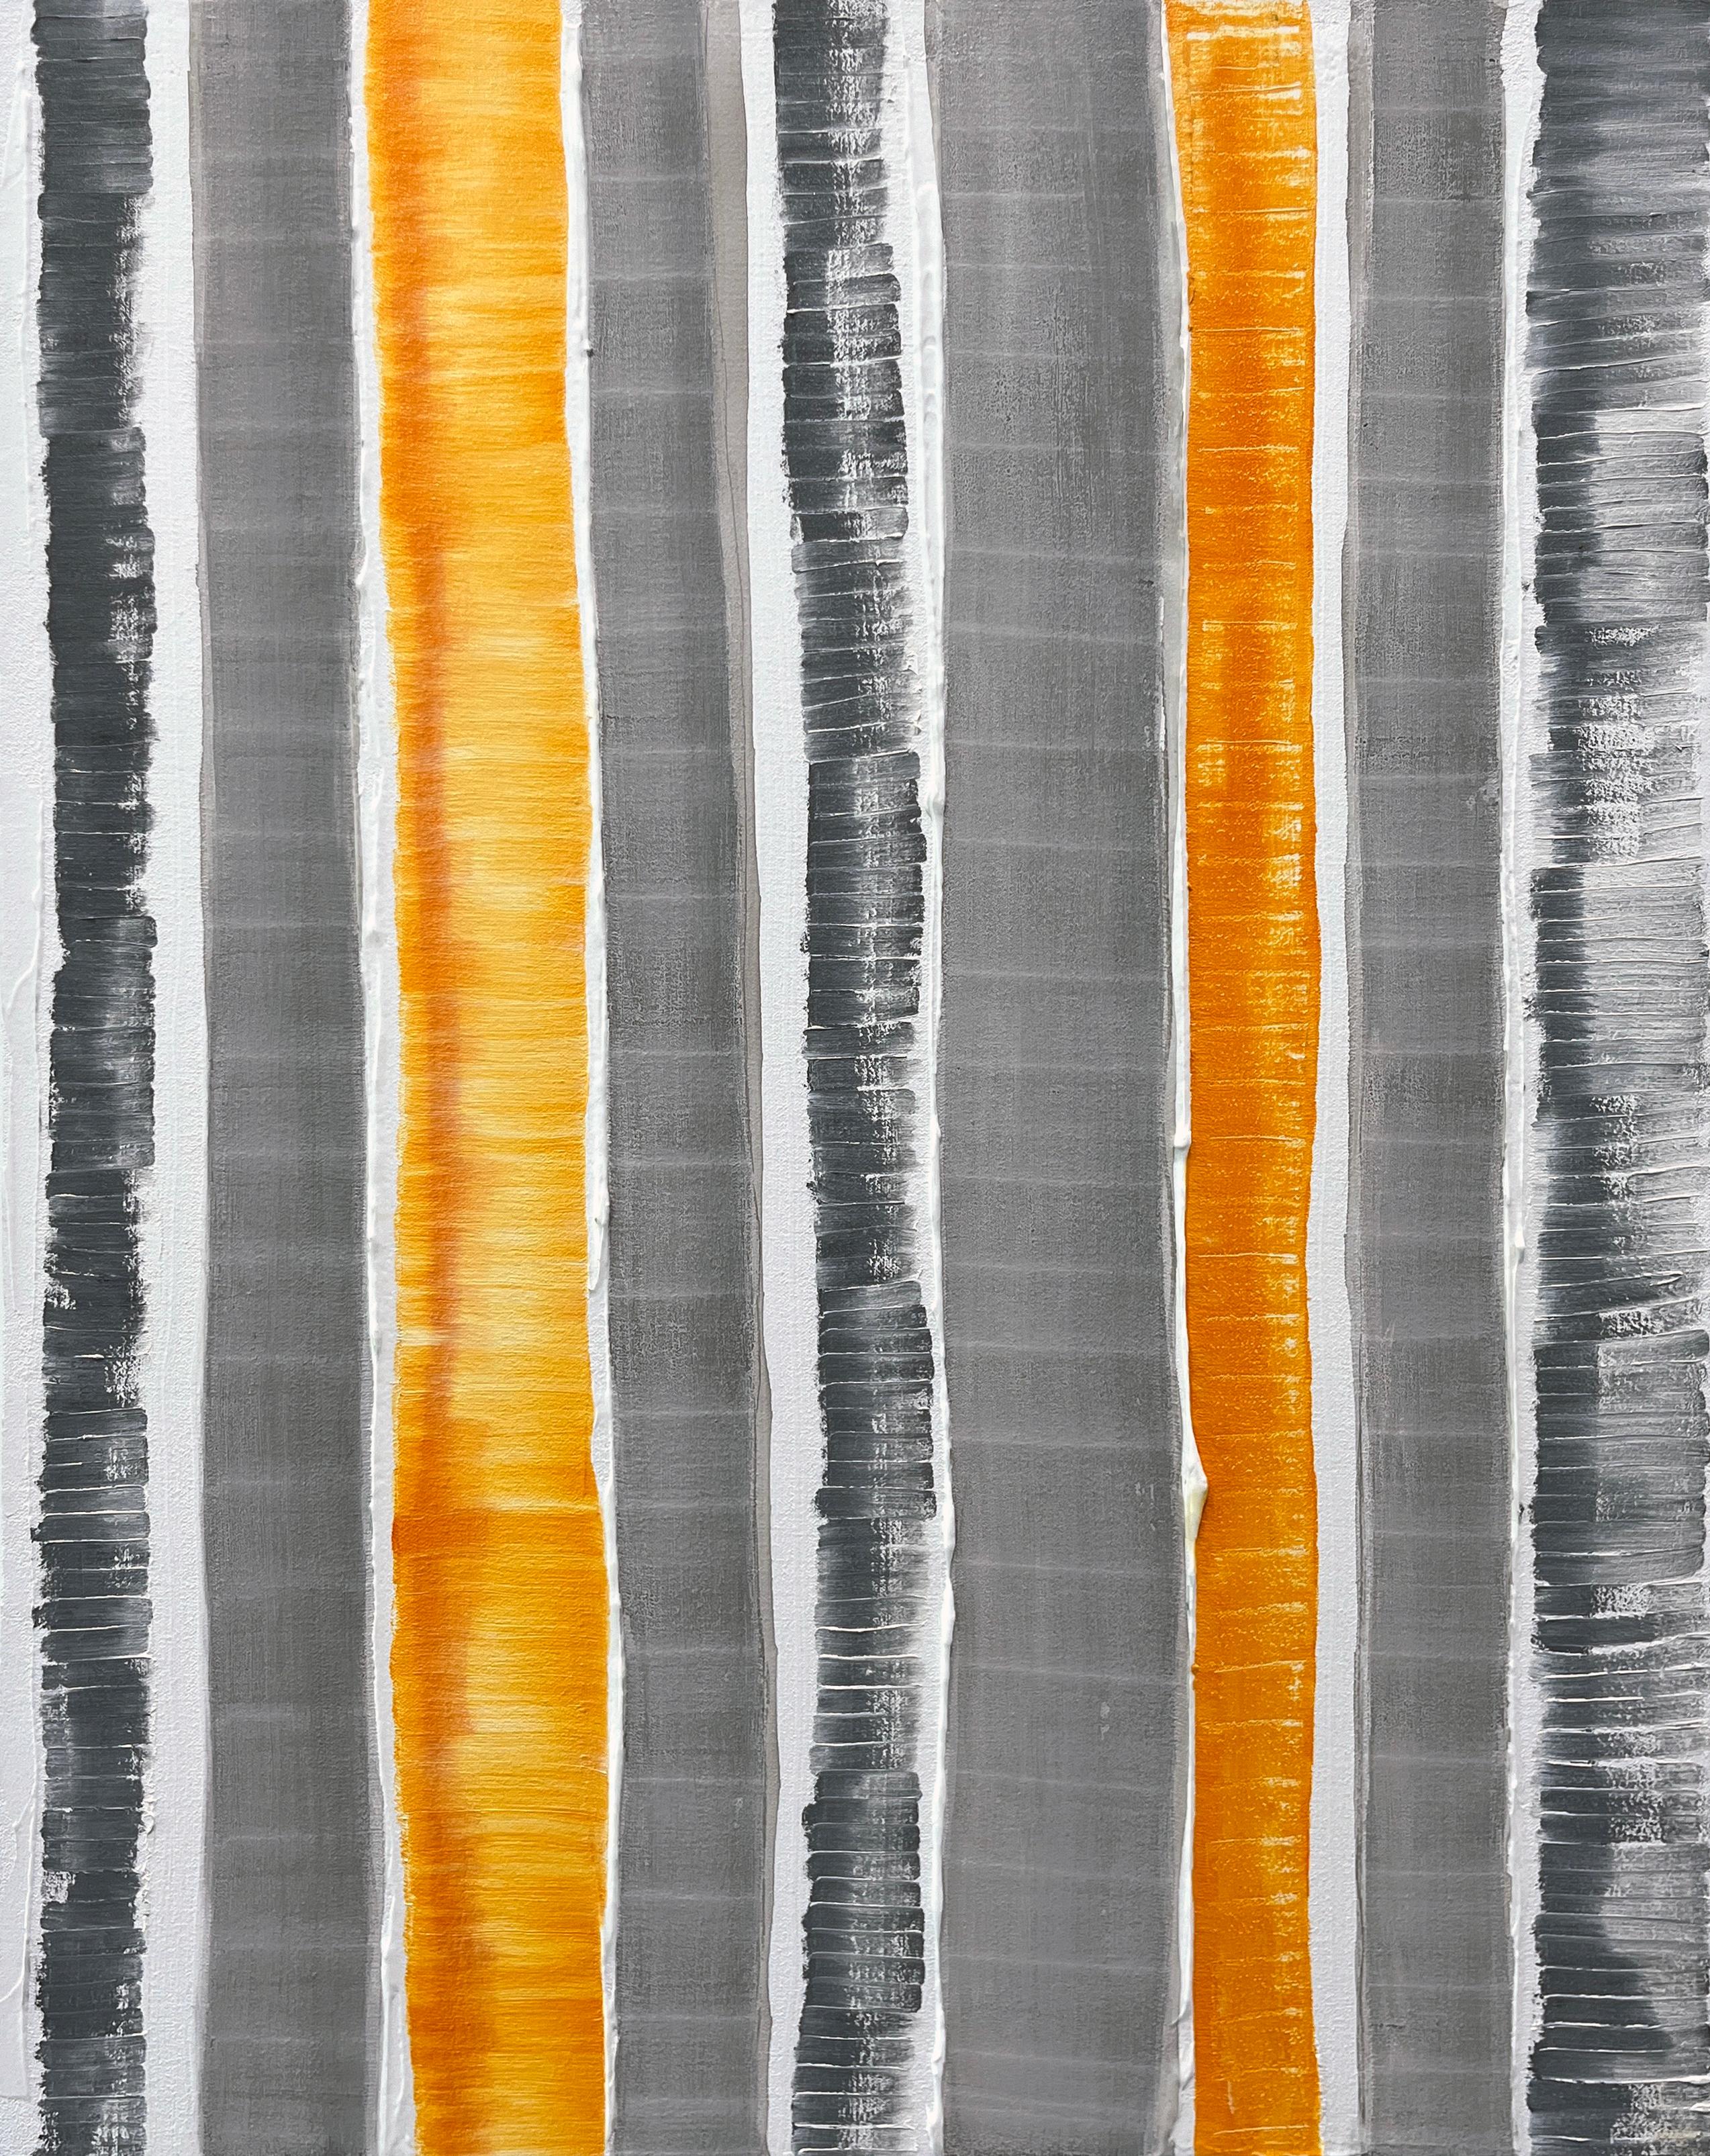 Lee Clarke Abstract Painting - "Barajas" Contemporary Linear Abstraction Yellow, Grey, & White Canvas Painting